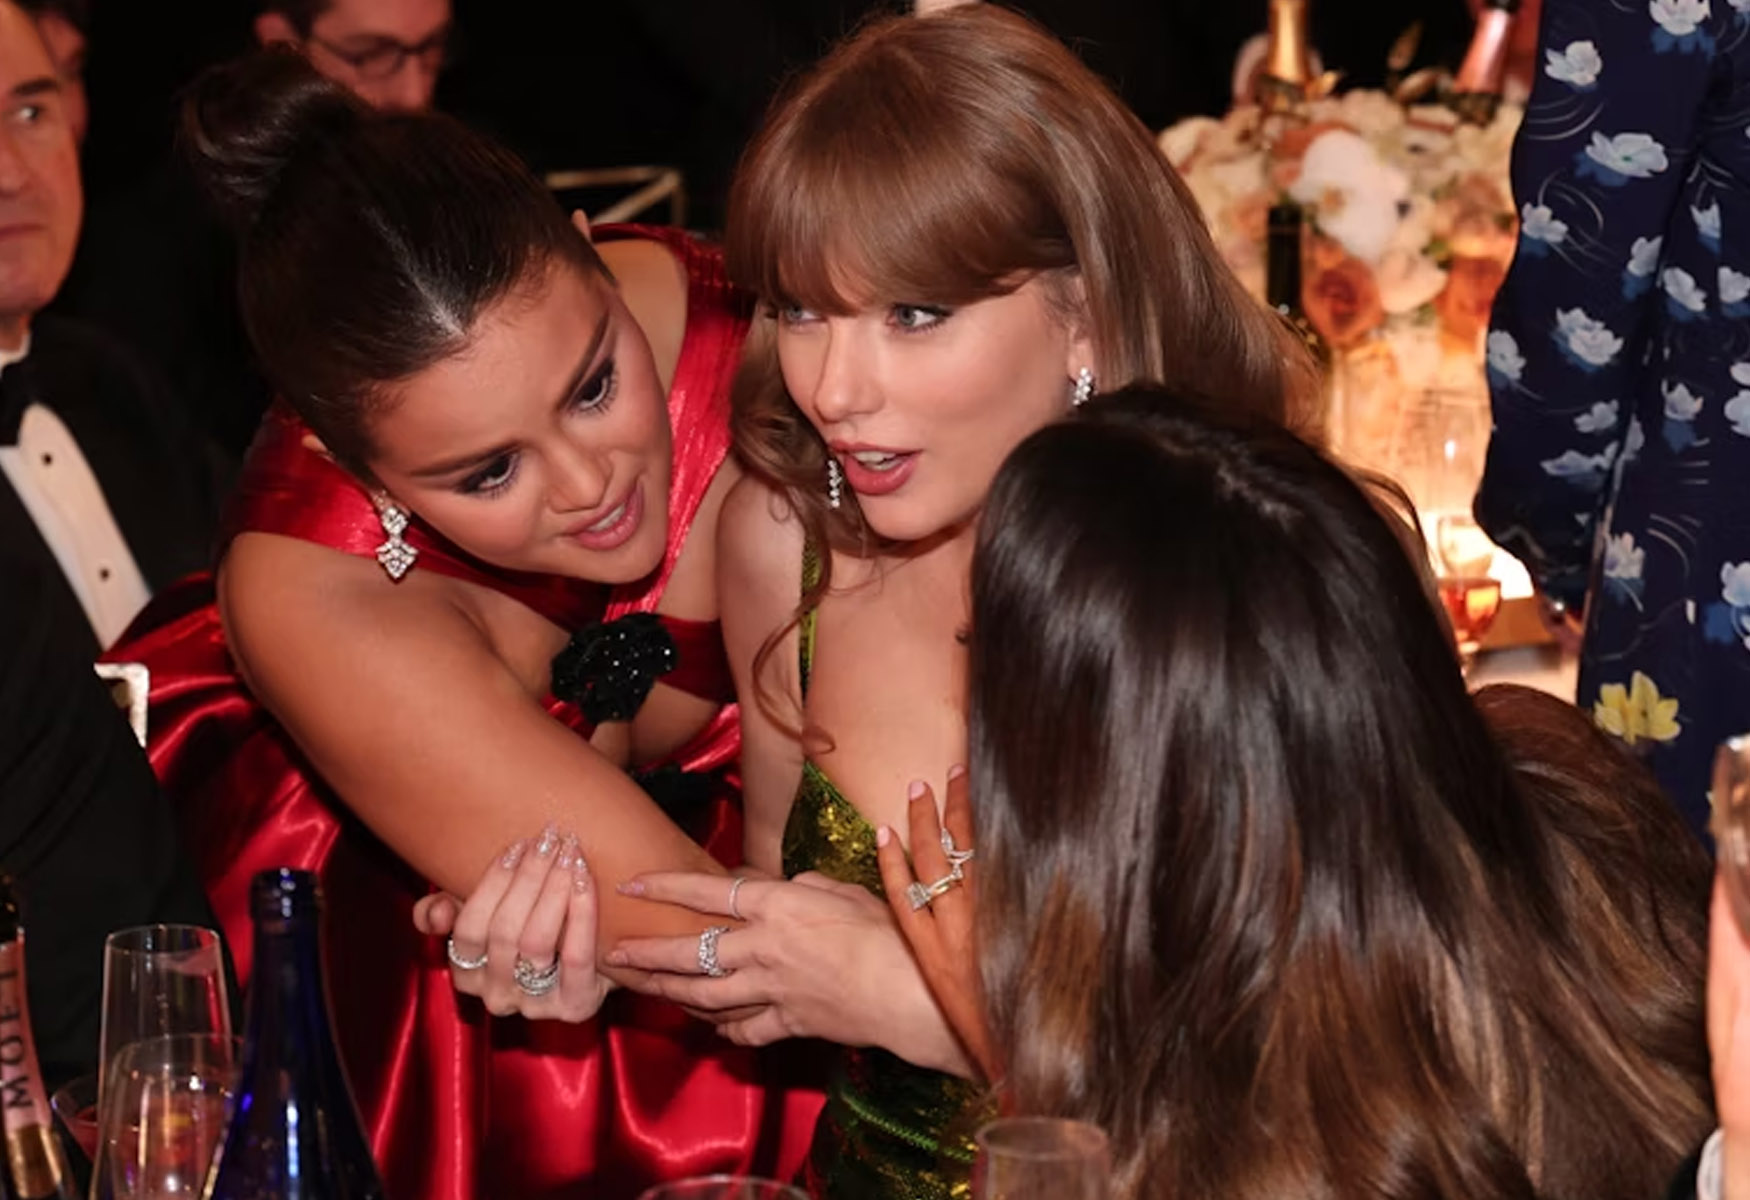 Selena Gomez’s Whispers To Taylor Swift At Golden Globes Spark Speculation